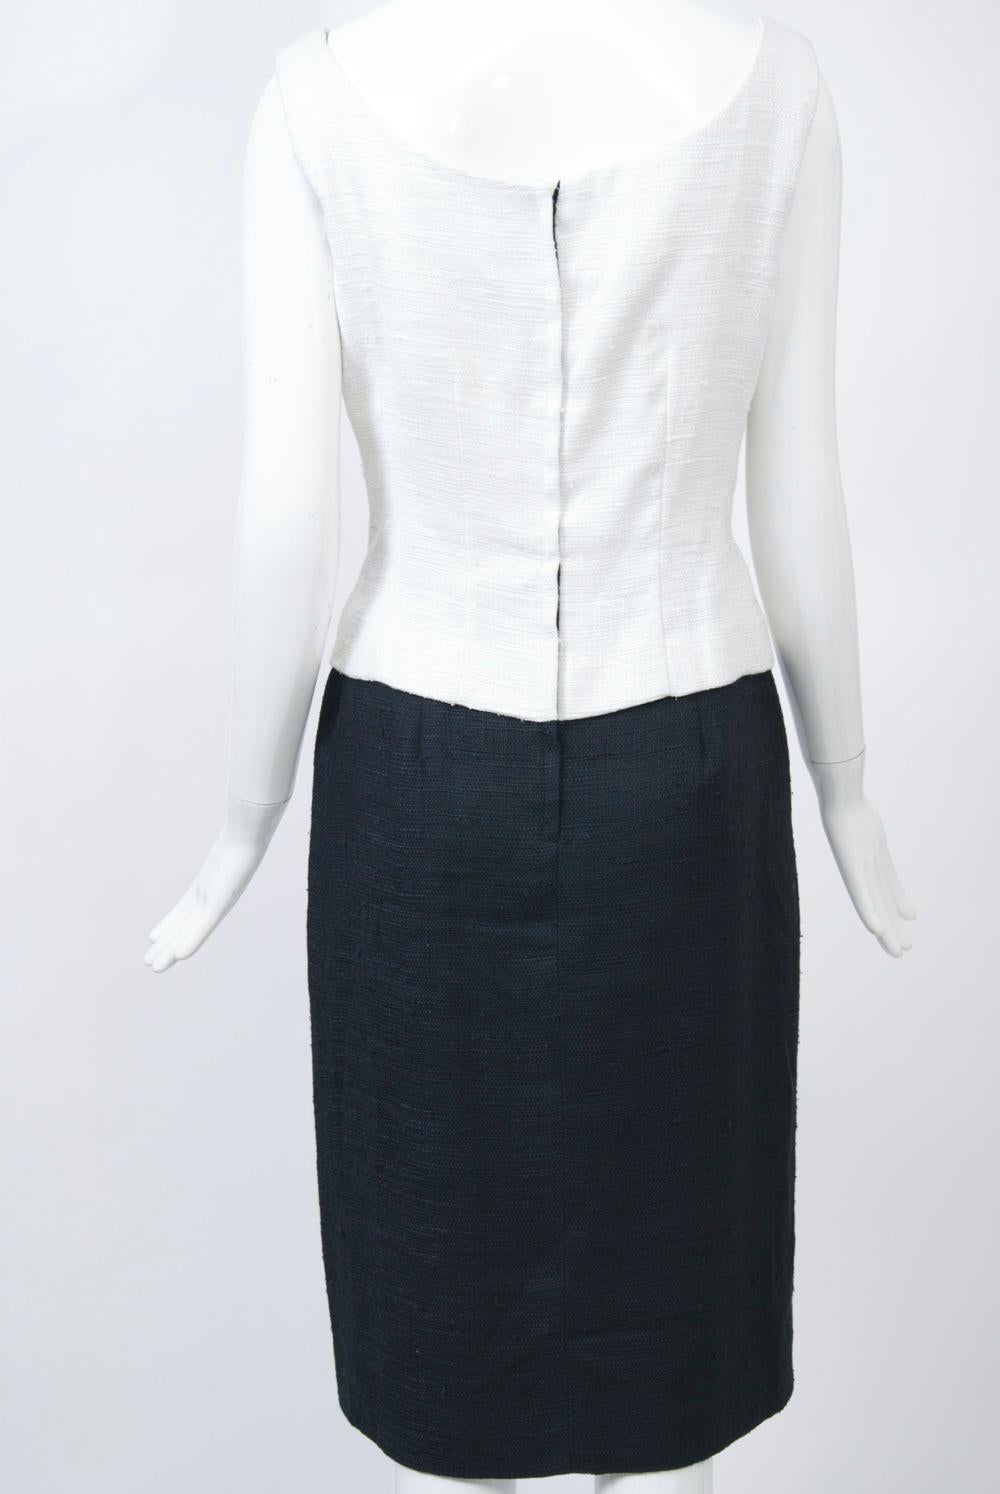 Women's 1960s White and Black Dress and Coat Ensemble For Sale